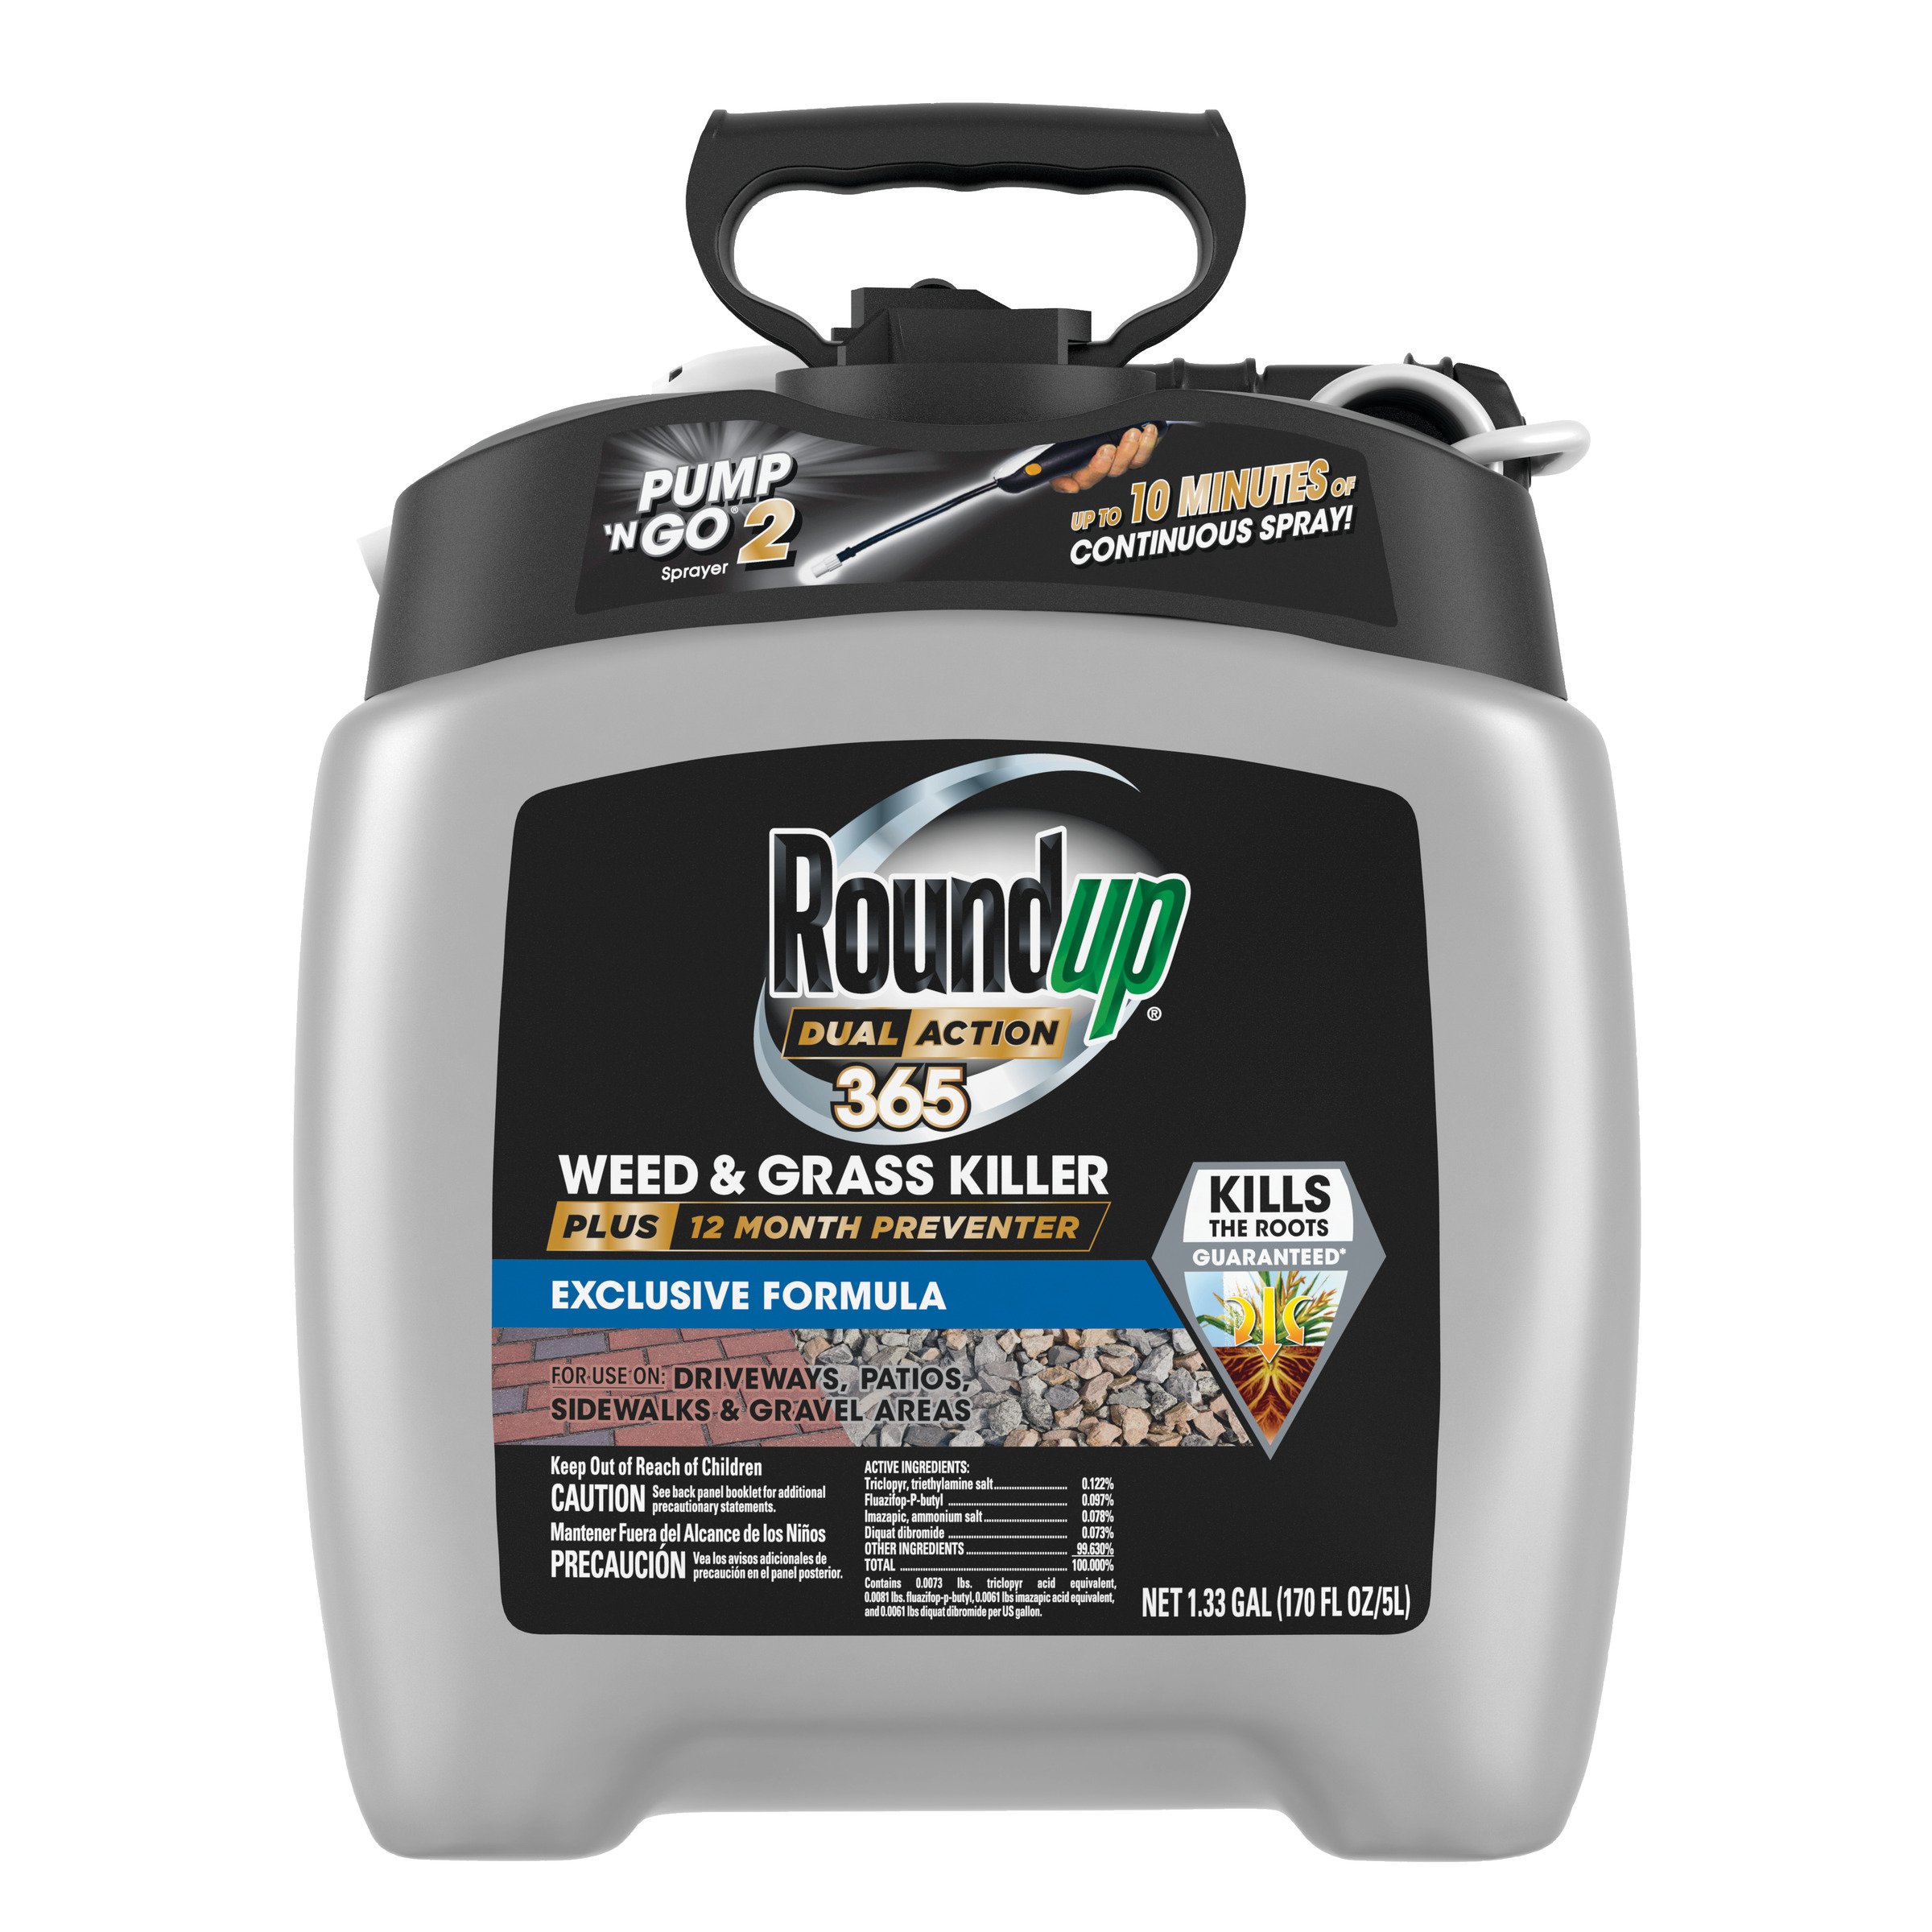 Roundup Dual Action 365 Weed & Grass Killer Plus 12 Month Preventer Pump 'N Go 2, 1.33 Gallon Jug with Wand